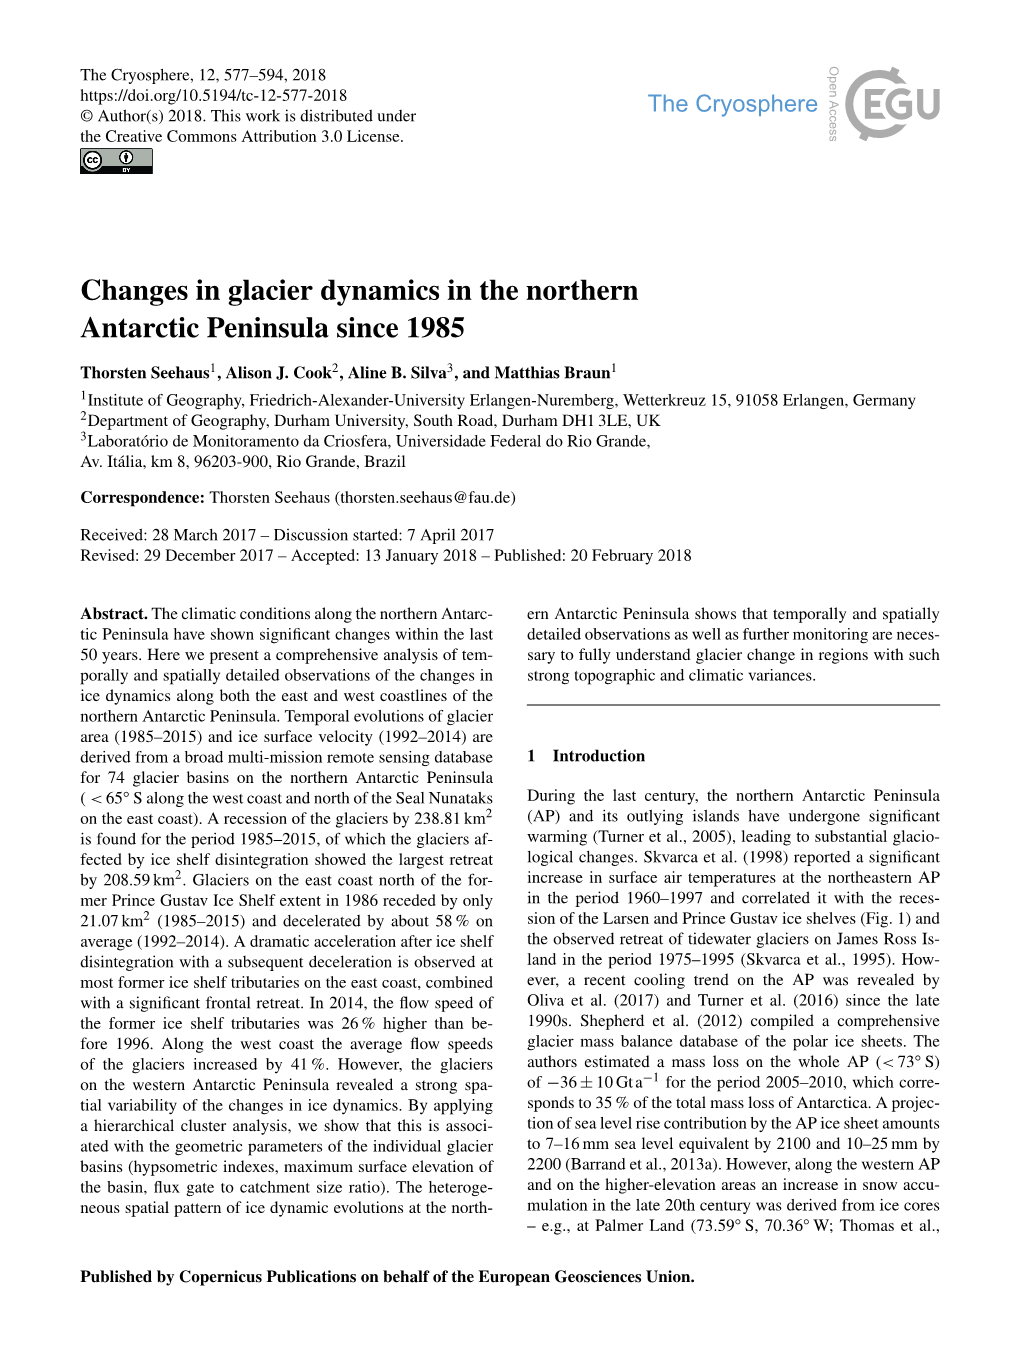 Changes in Glacier Dynamics in the Northern Antarctic Peninsula Since 1985